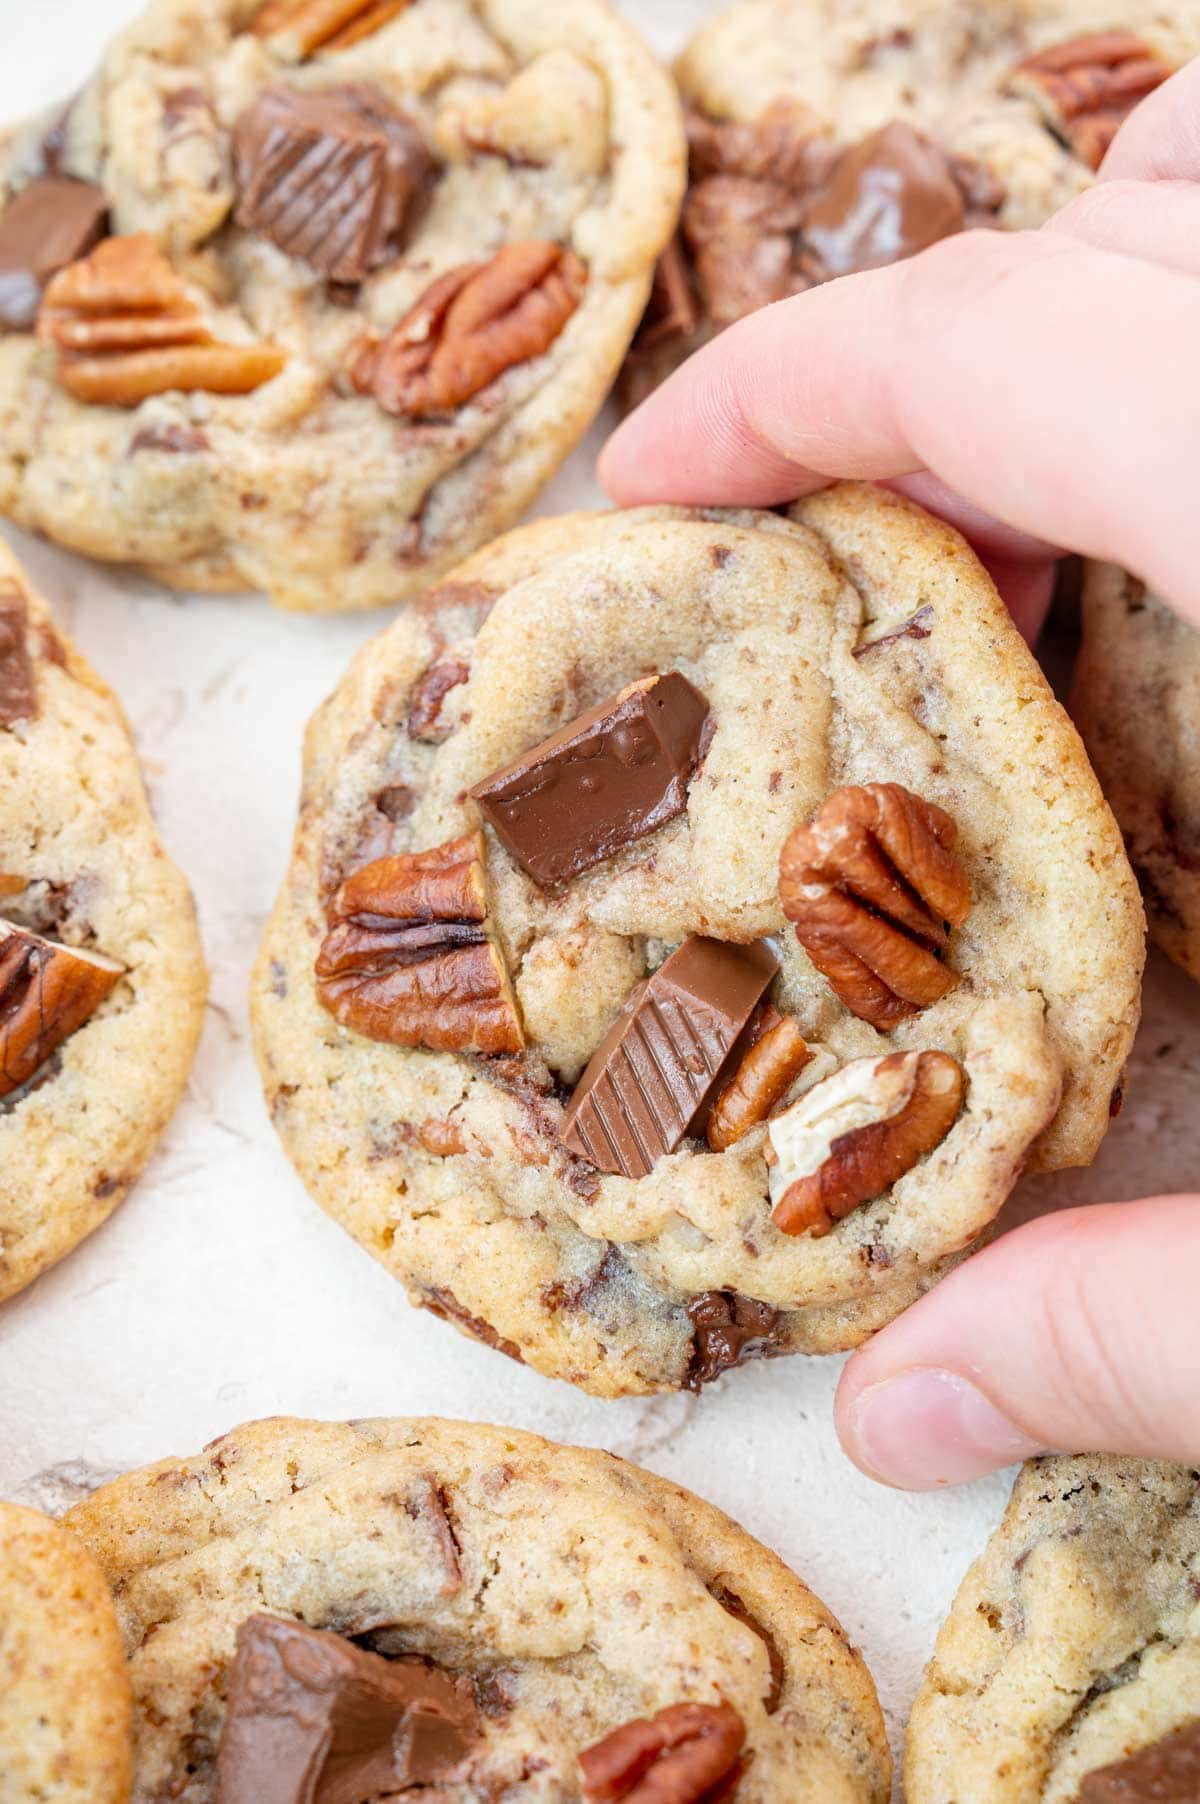 A chocolate chip pecan cookie held in a hand.